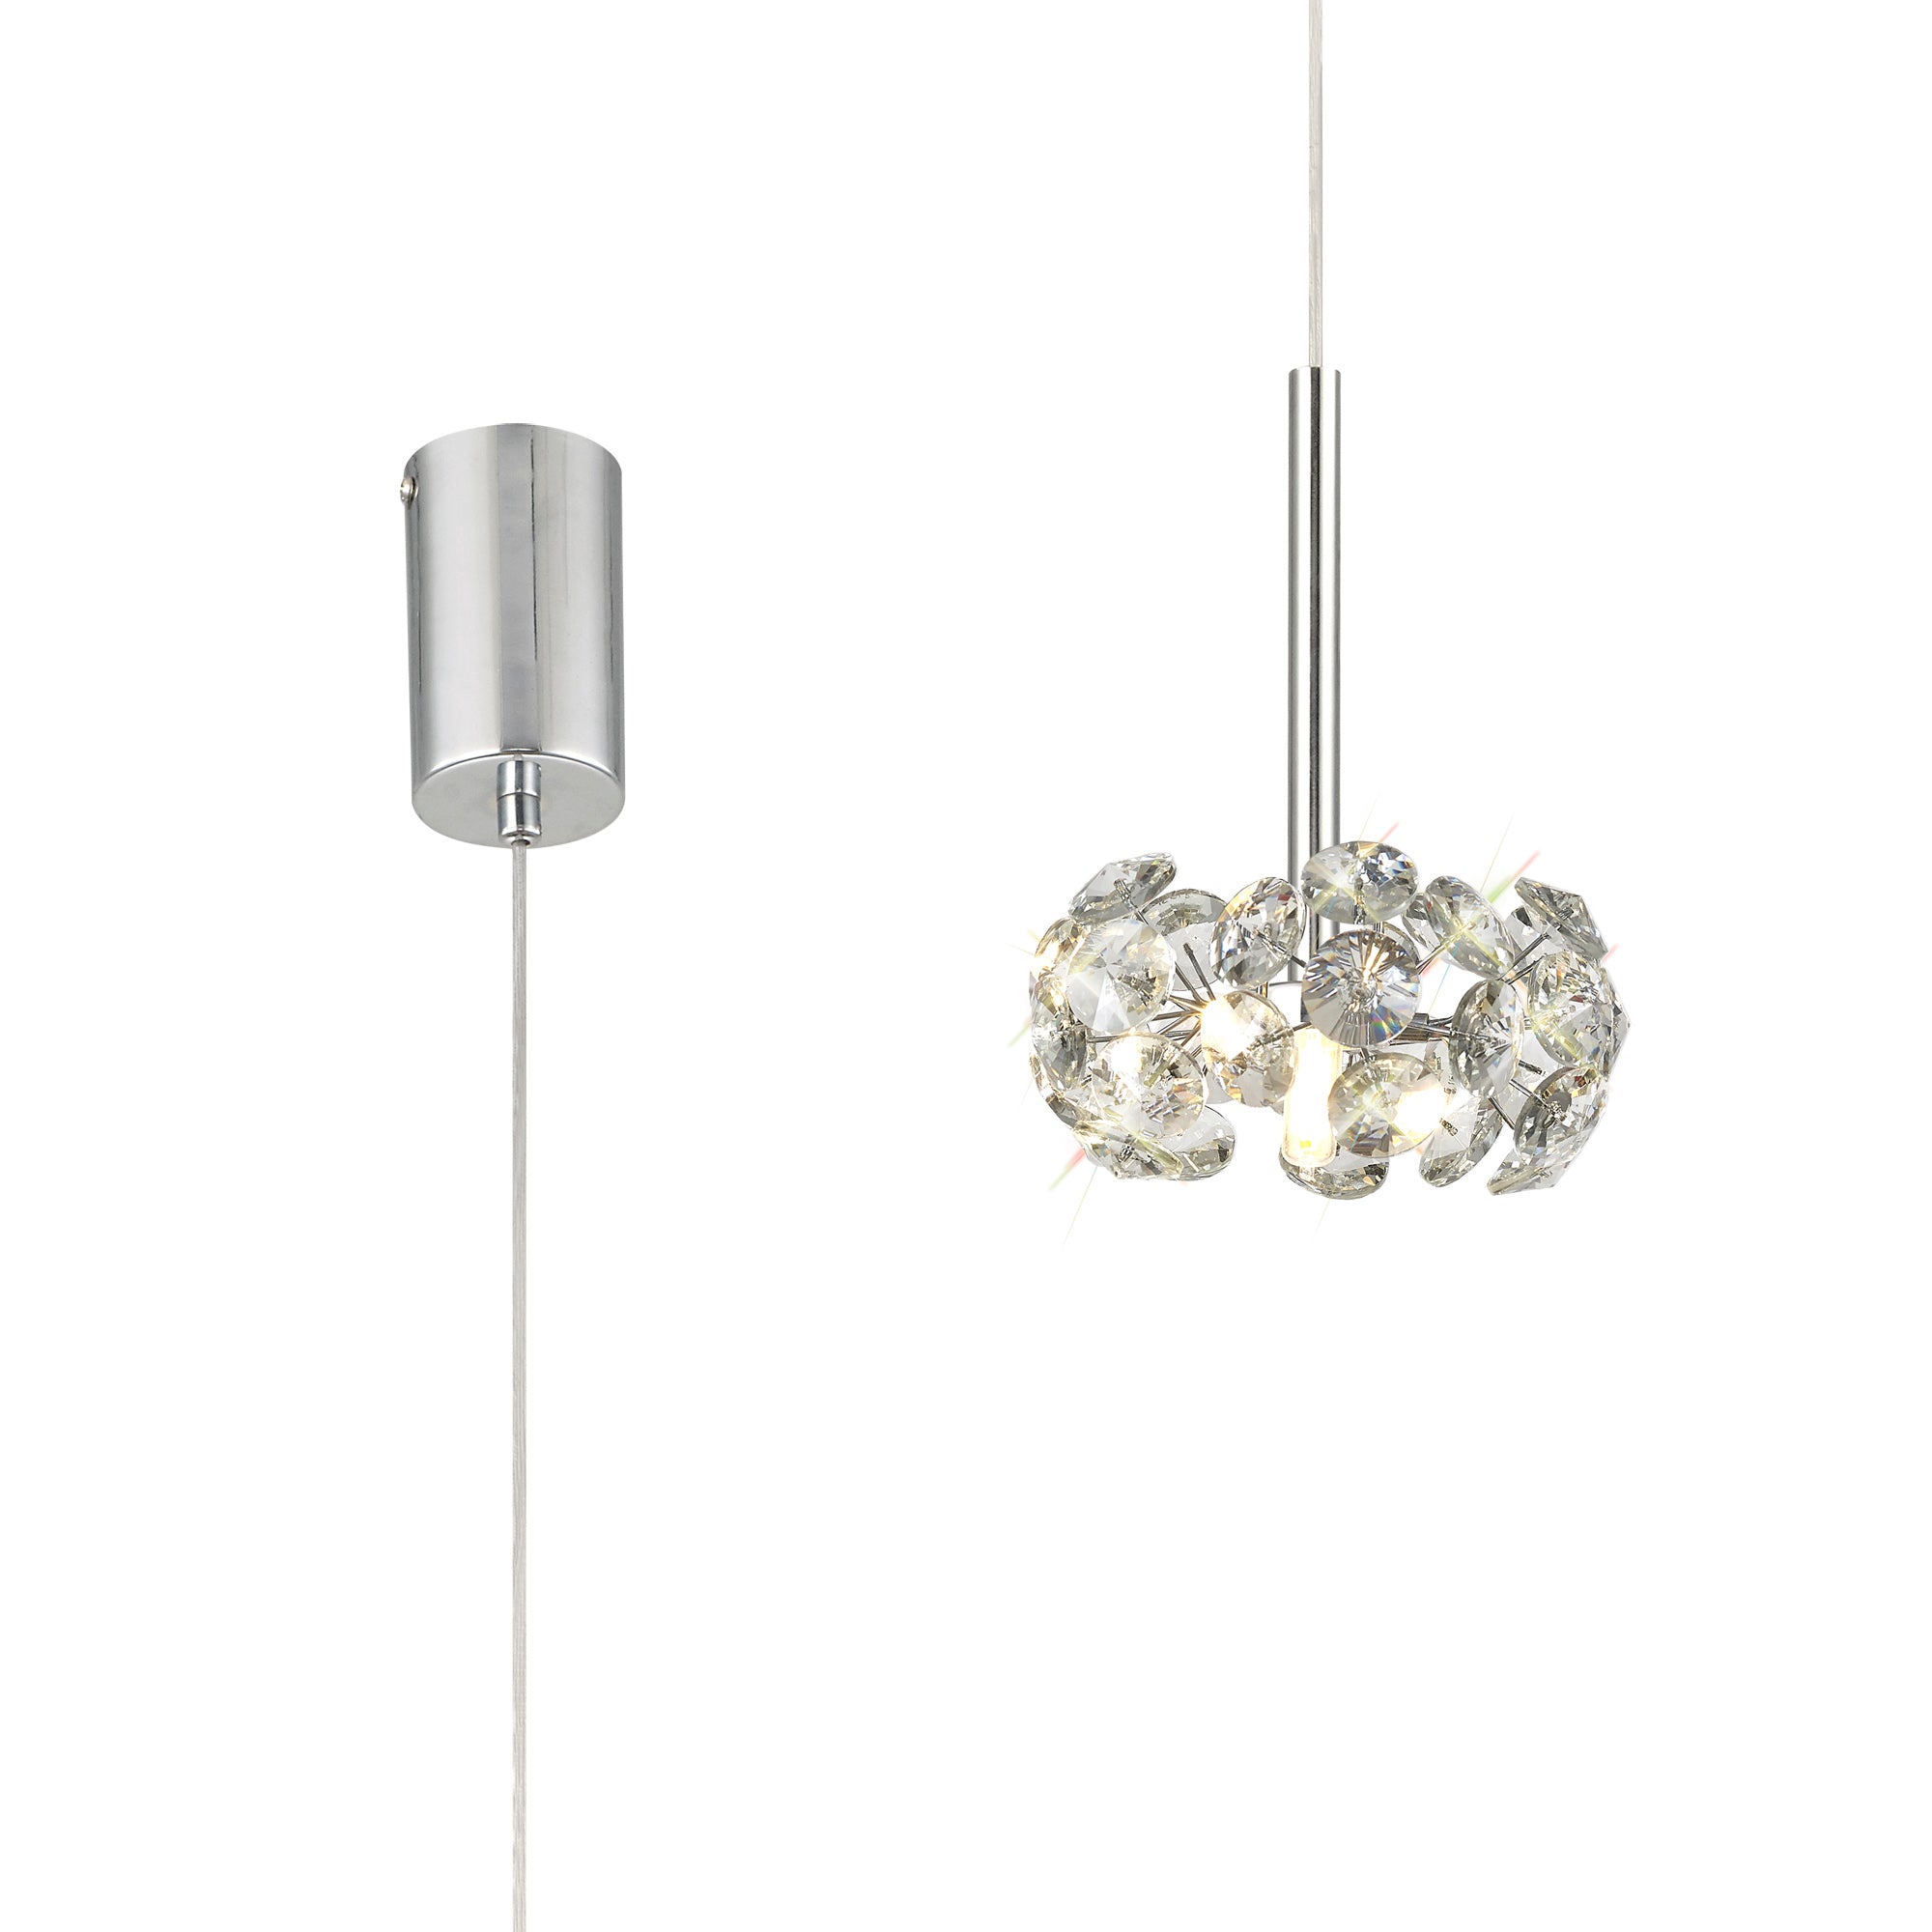 Idis/Chakkar 1 Light G9 Switched Wall Lamp With Polished Chrome And Crystal Shade